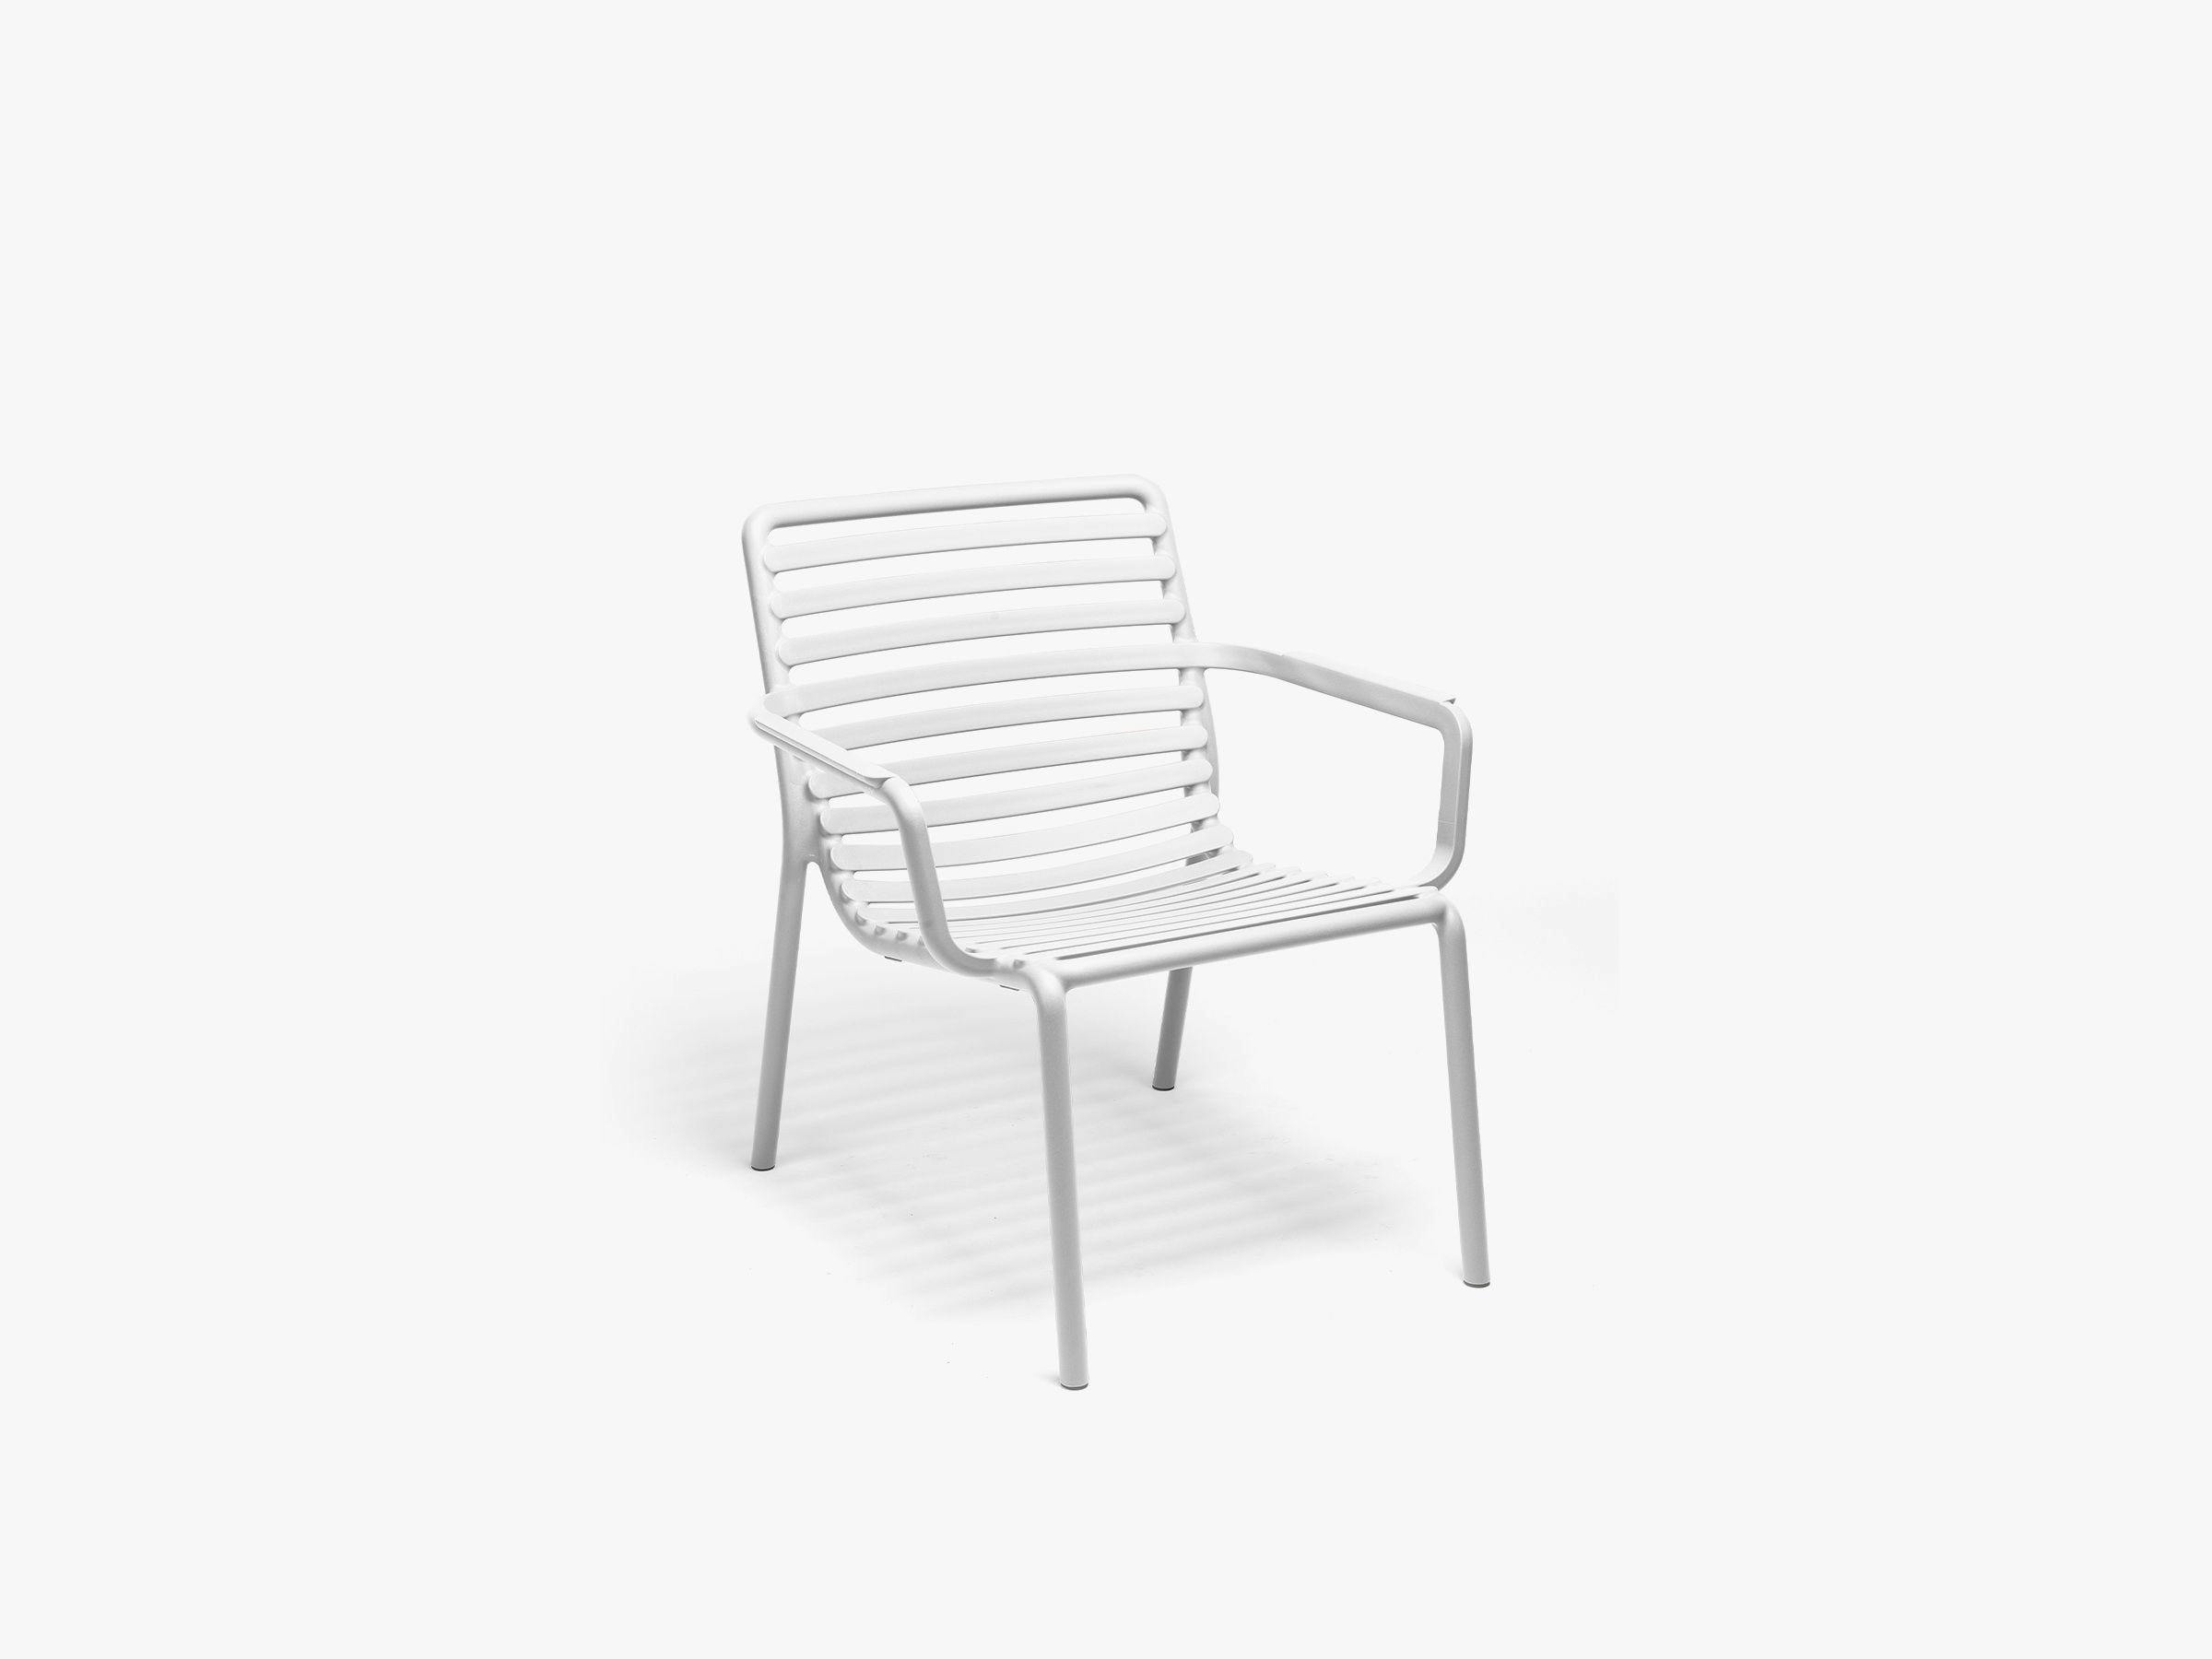 Euro Form Doga Relax Chair - Bianco